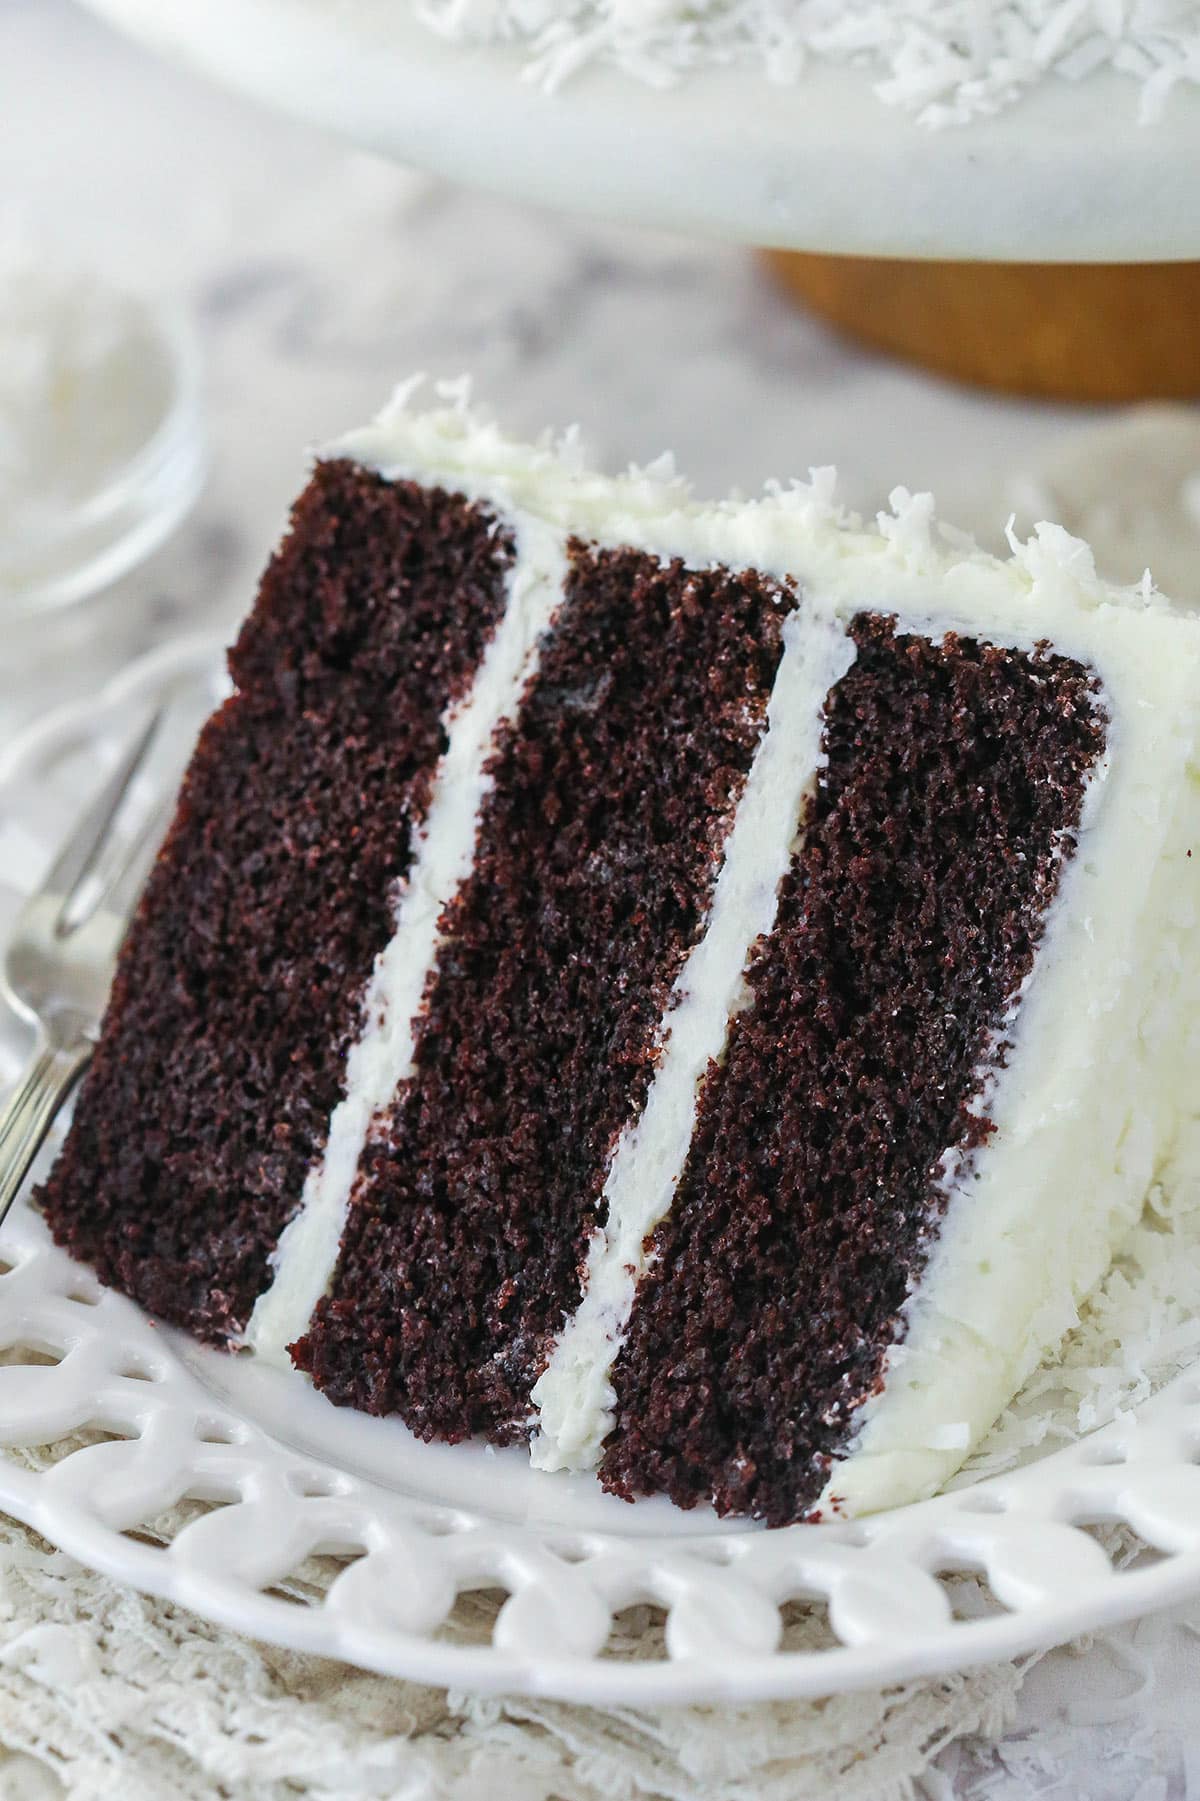 A slice of coconut chocolate cake on a plate.